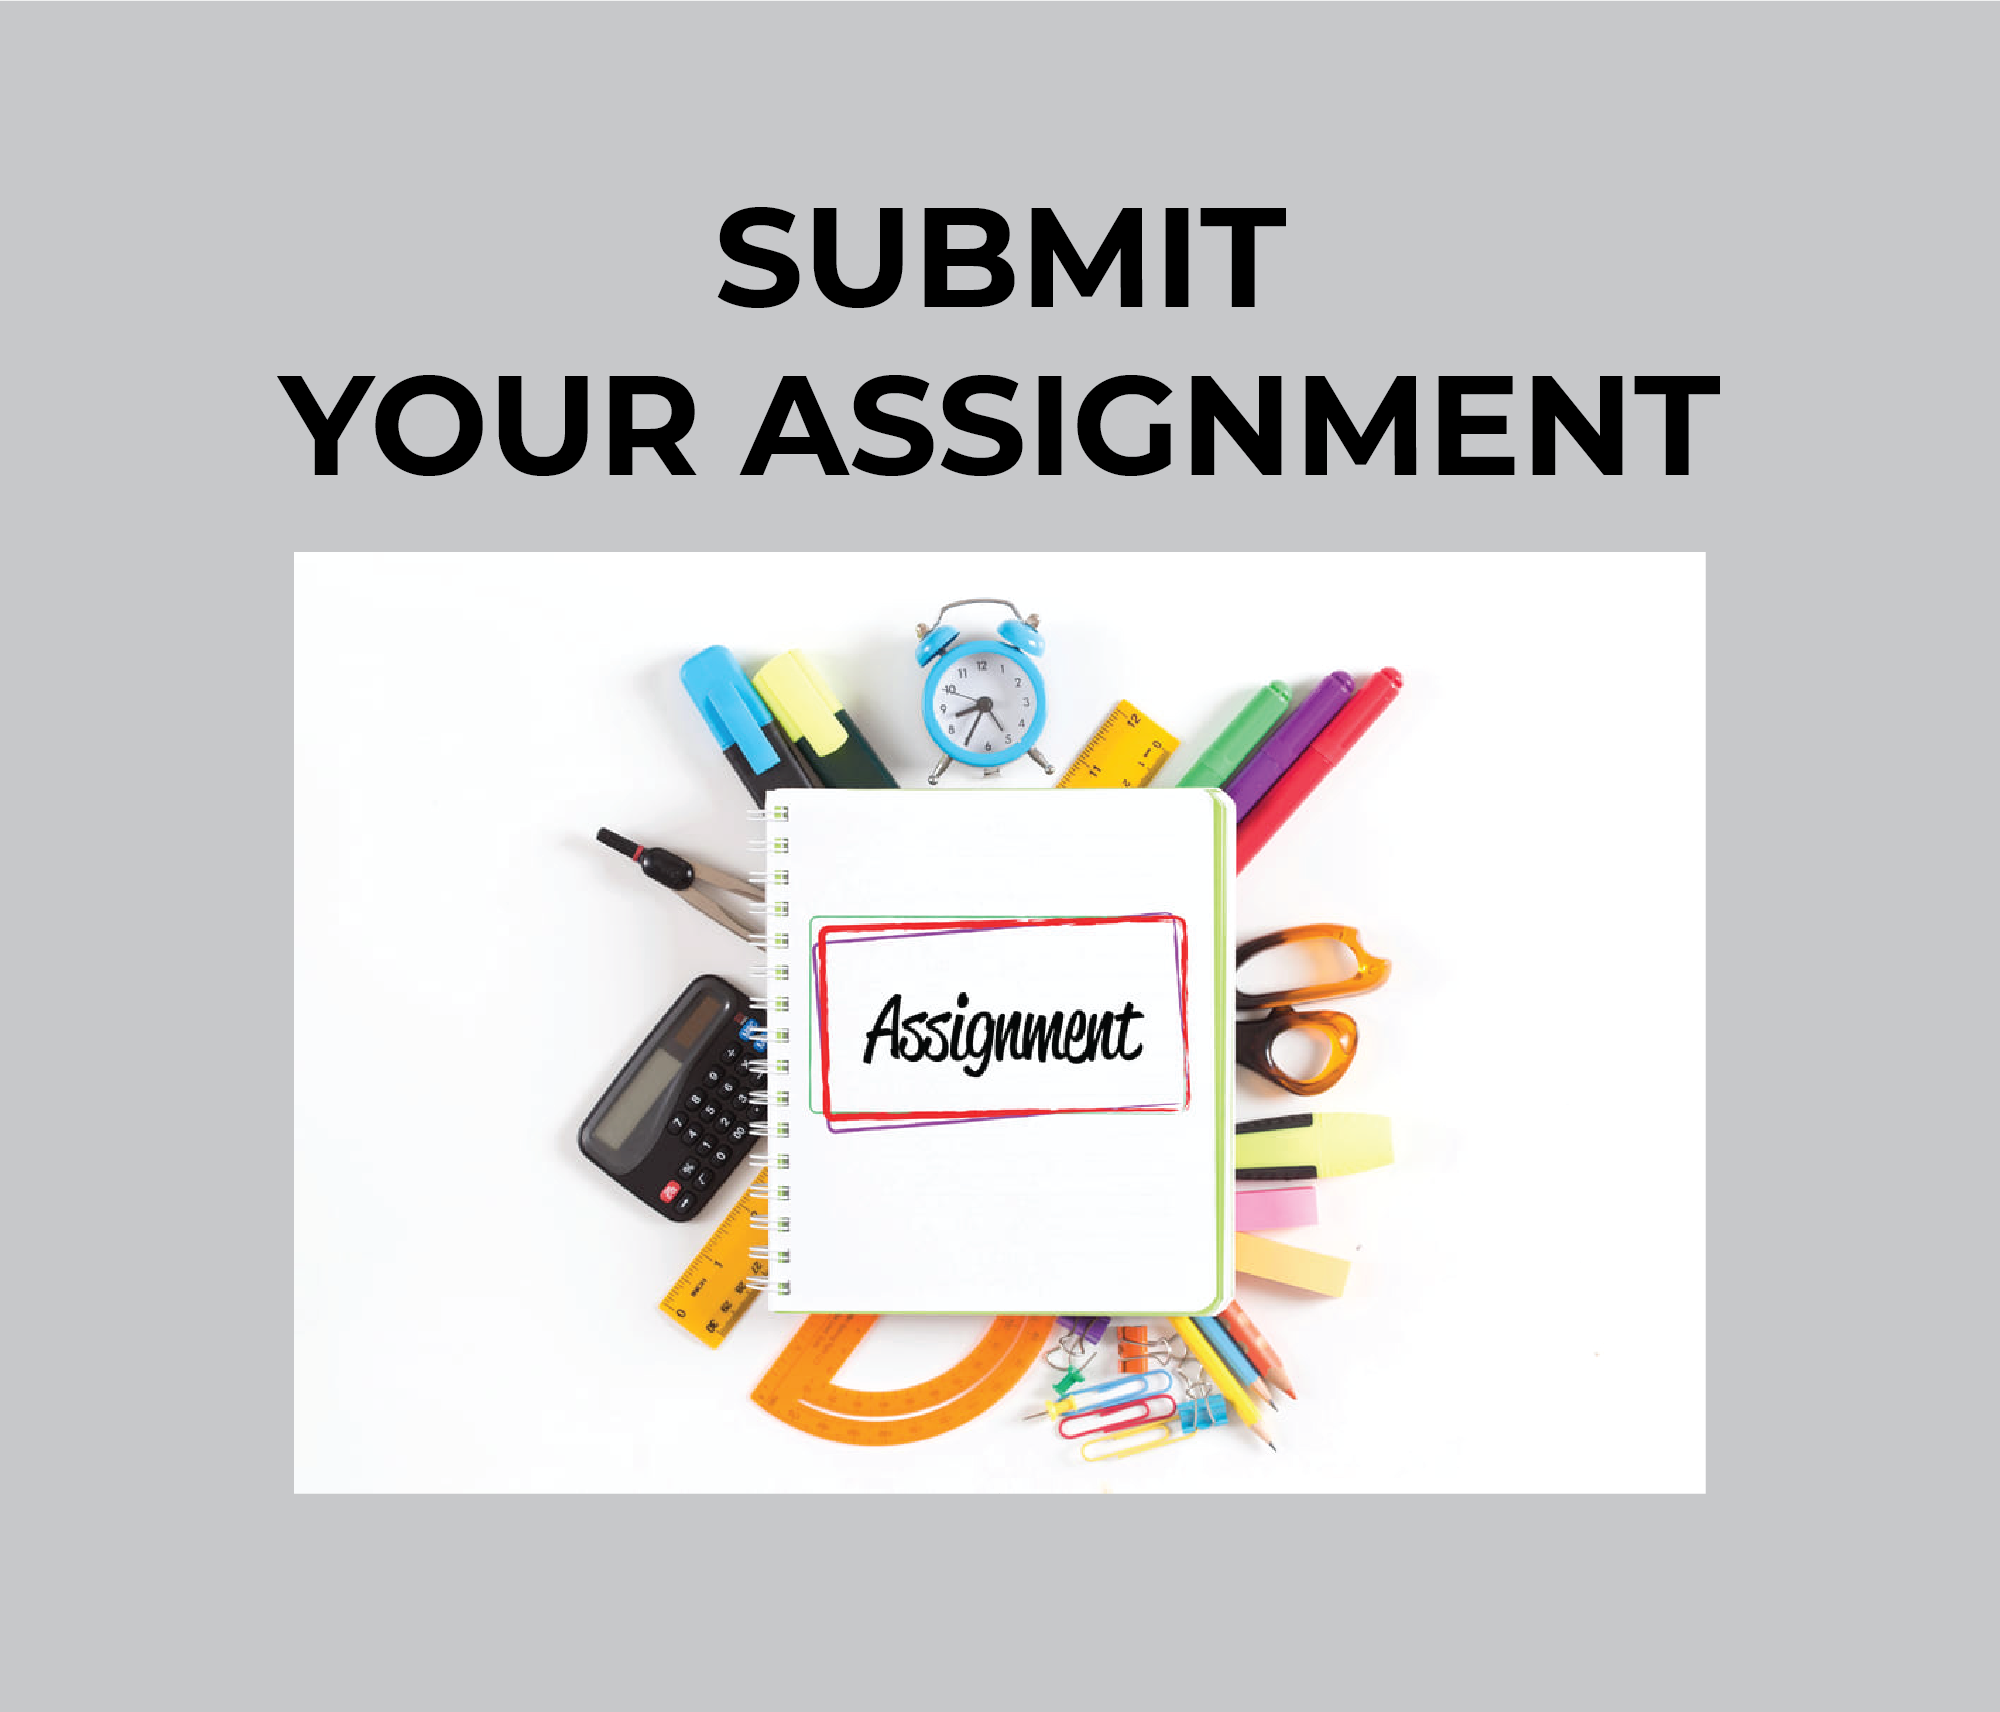 submit your assignment by tomorrow